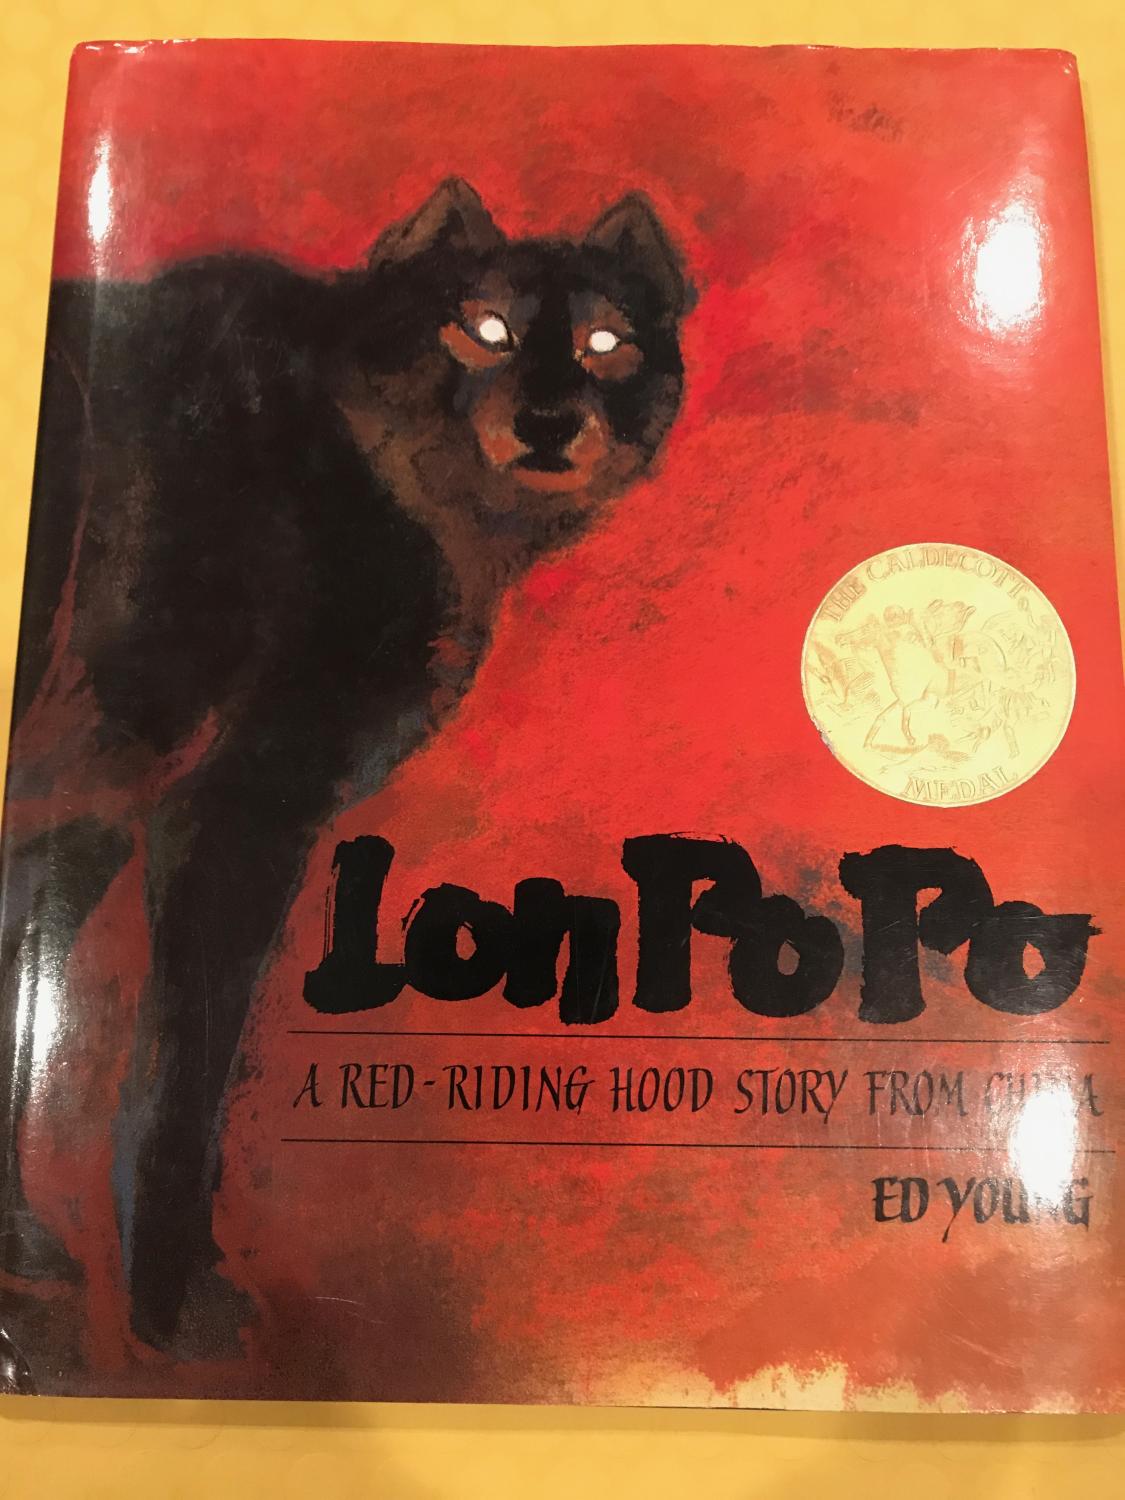 Near　Edition,　Story　by　Po　First　Red-Riding　Happy　Heroes　fine　Young:　(1989)　Hood　China　Signed　a　by　Lon　from　Printing.,　Hardcover　Po　First　Ed　Author(s)